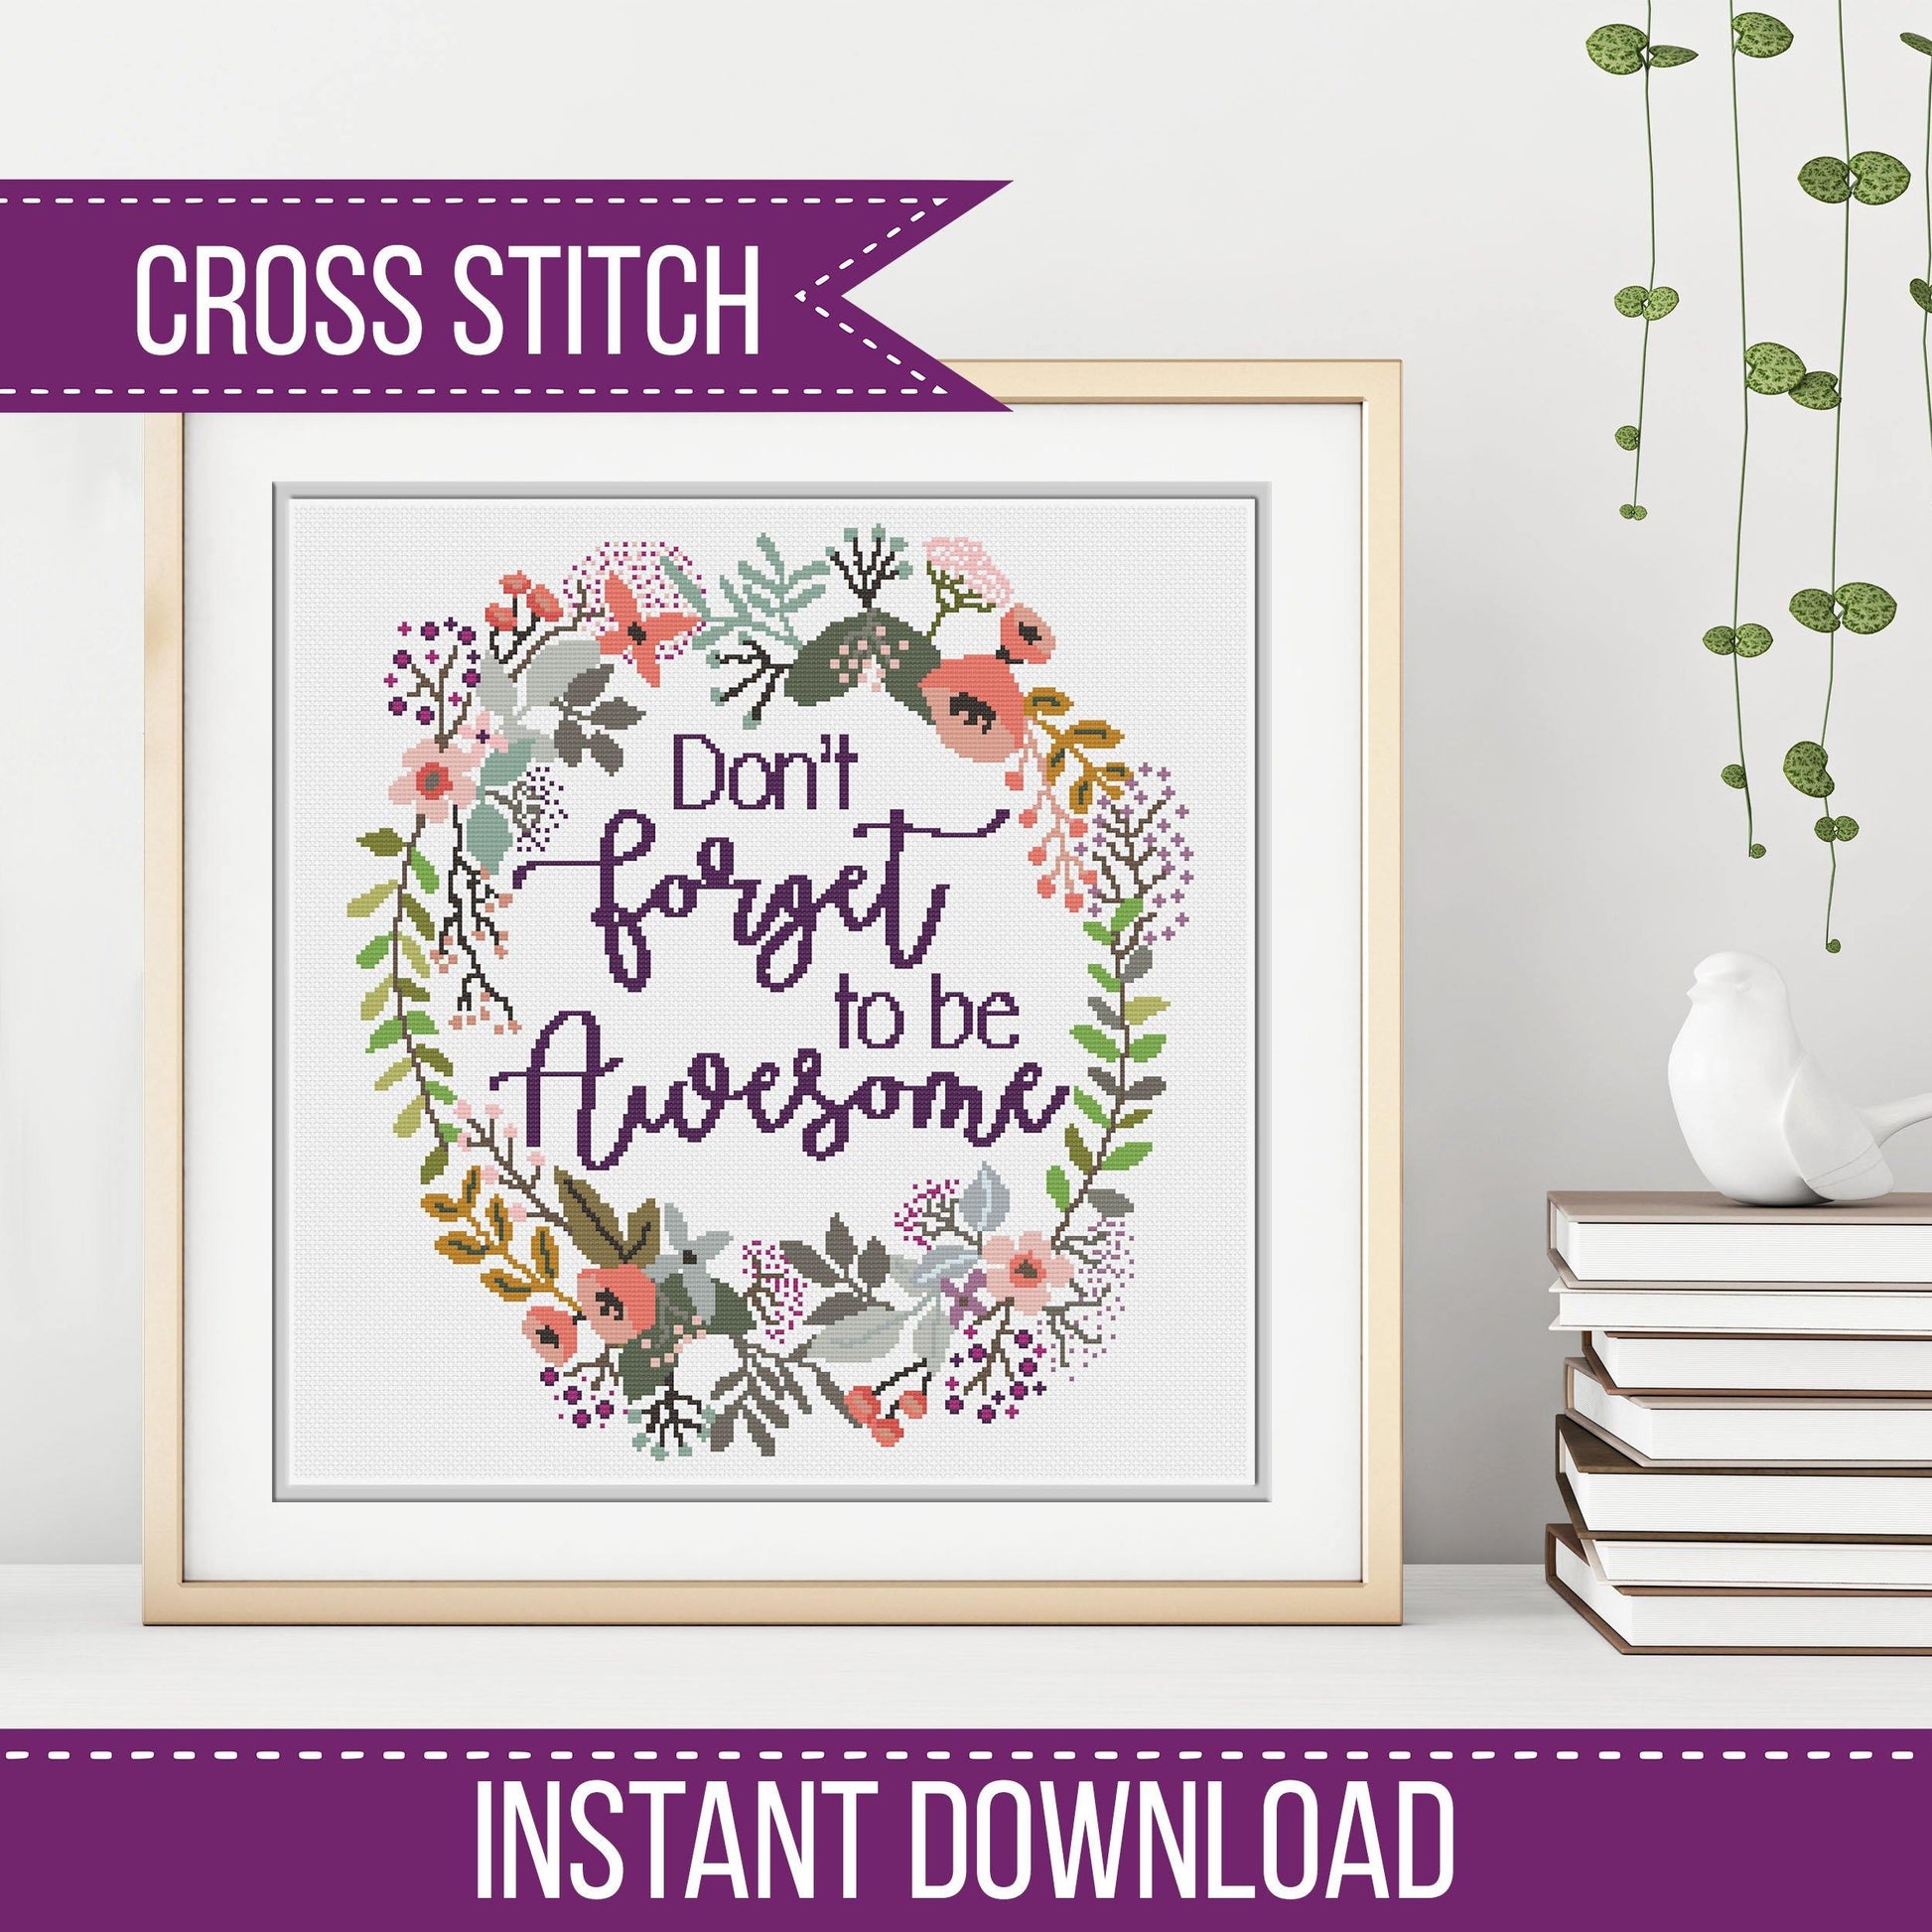 Don't forget to be Awesome - Blackwork Patterns & Cross Stitch by Peppermint Purple